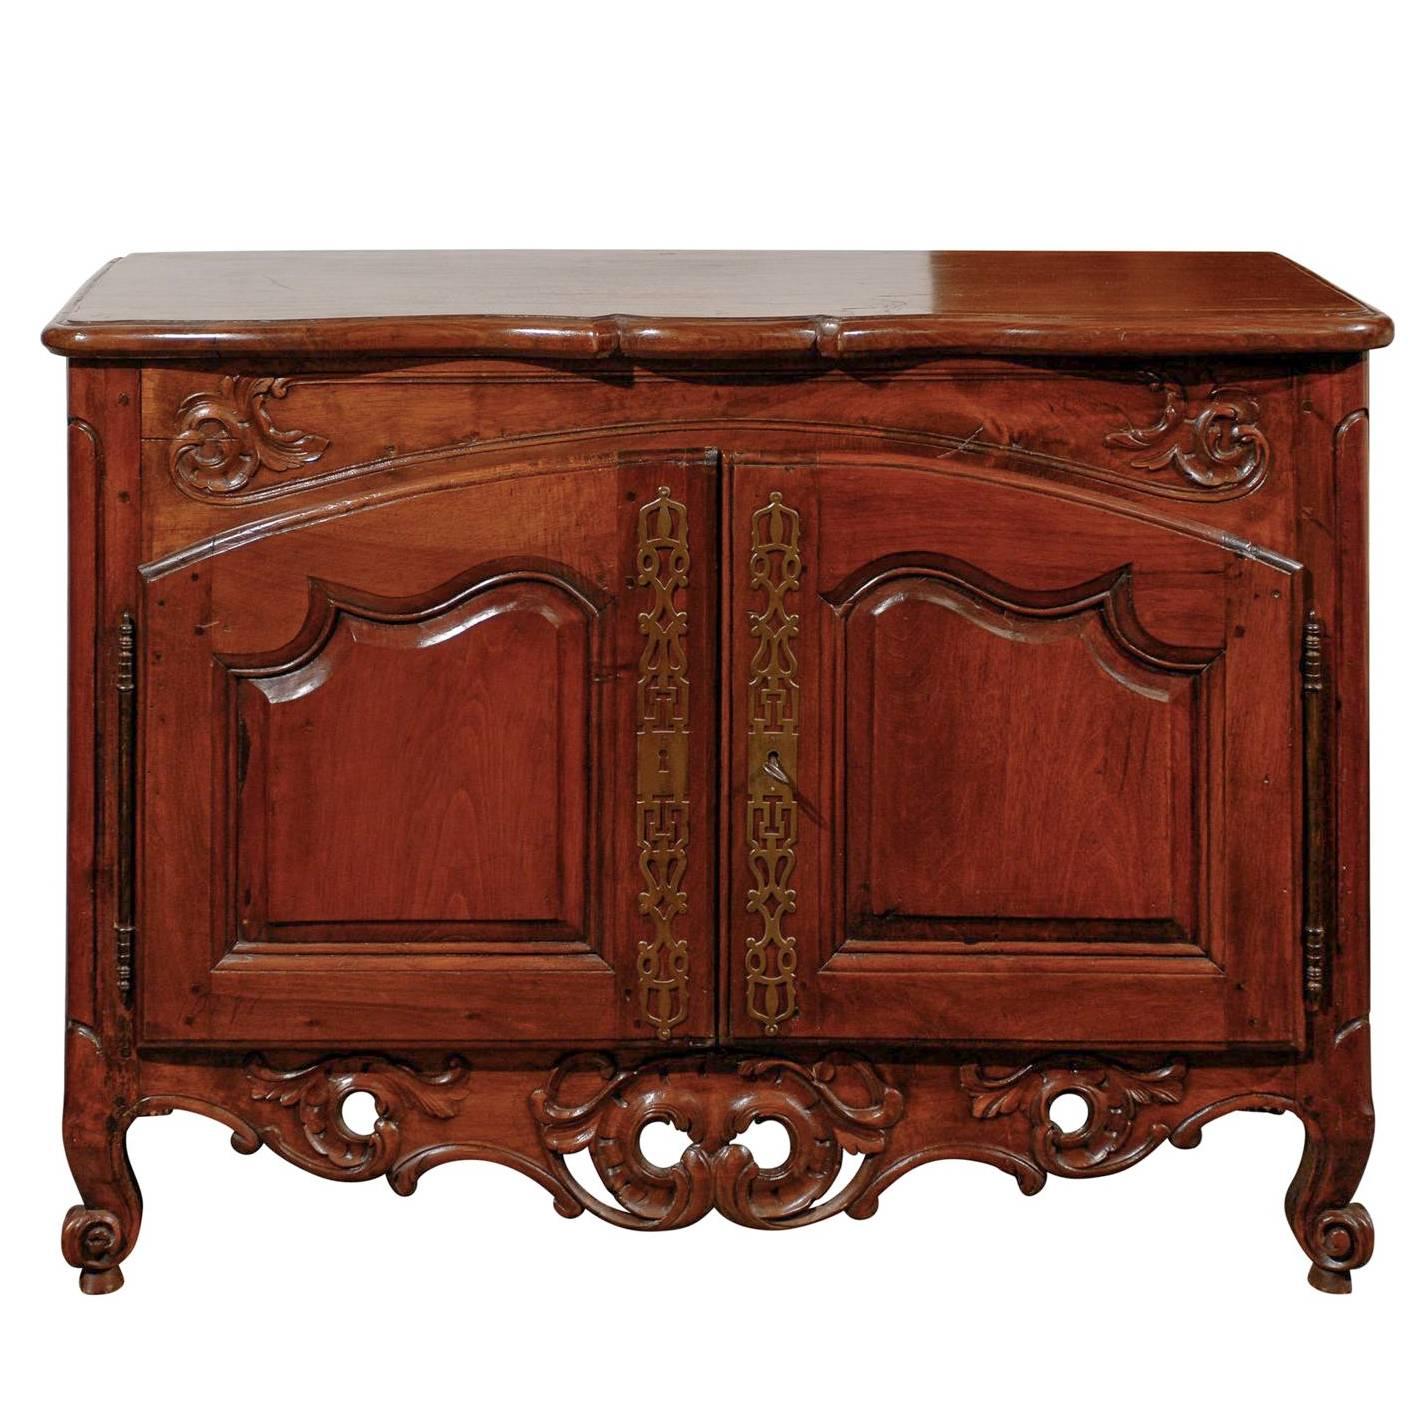 Period Regence French 1720s Walnut Two-Door Buffet with Carved and Pierced Skirt For Sale